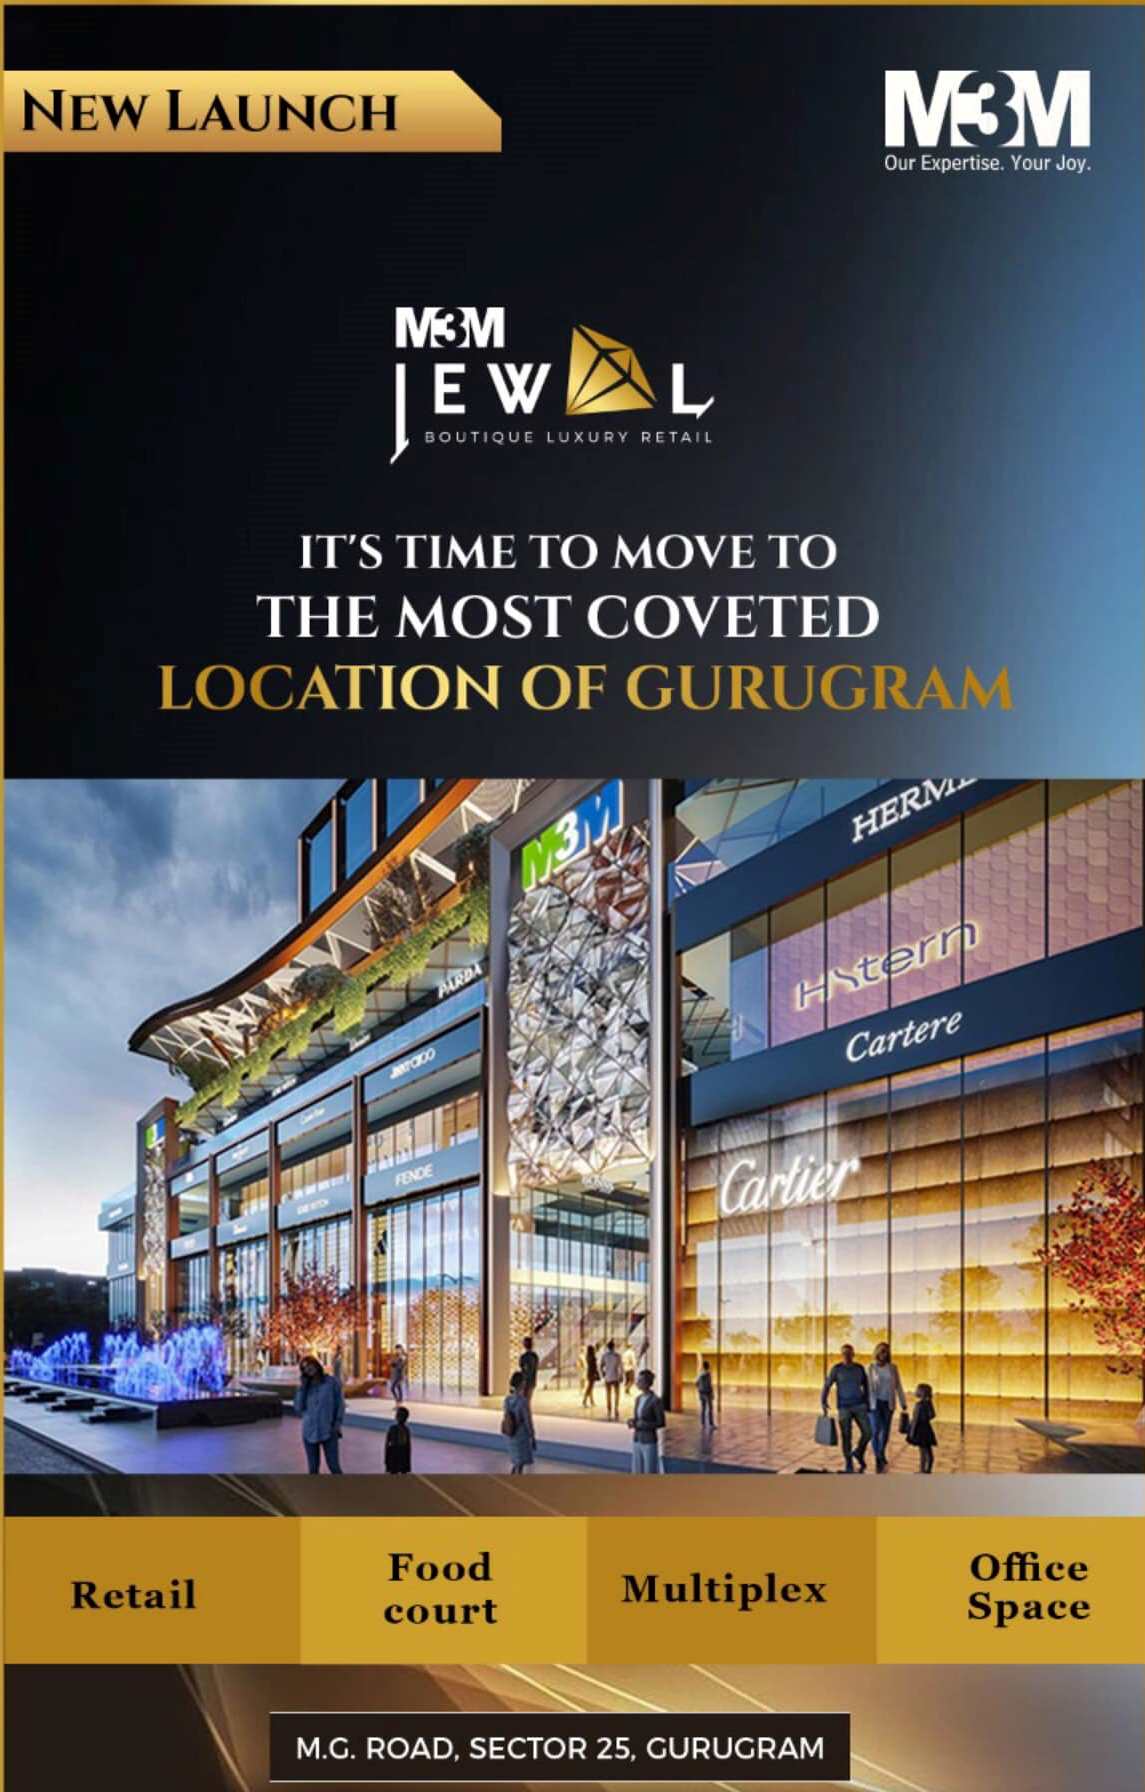 It’s a boutique luxury retail at M3M Jewel in Sector 25, Gurgaon